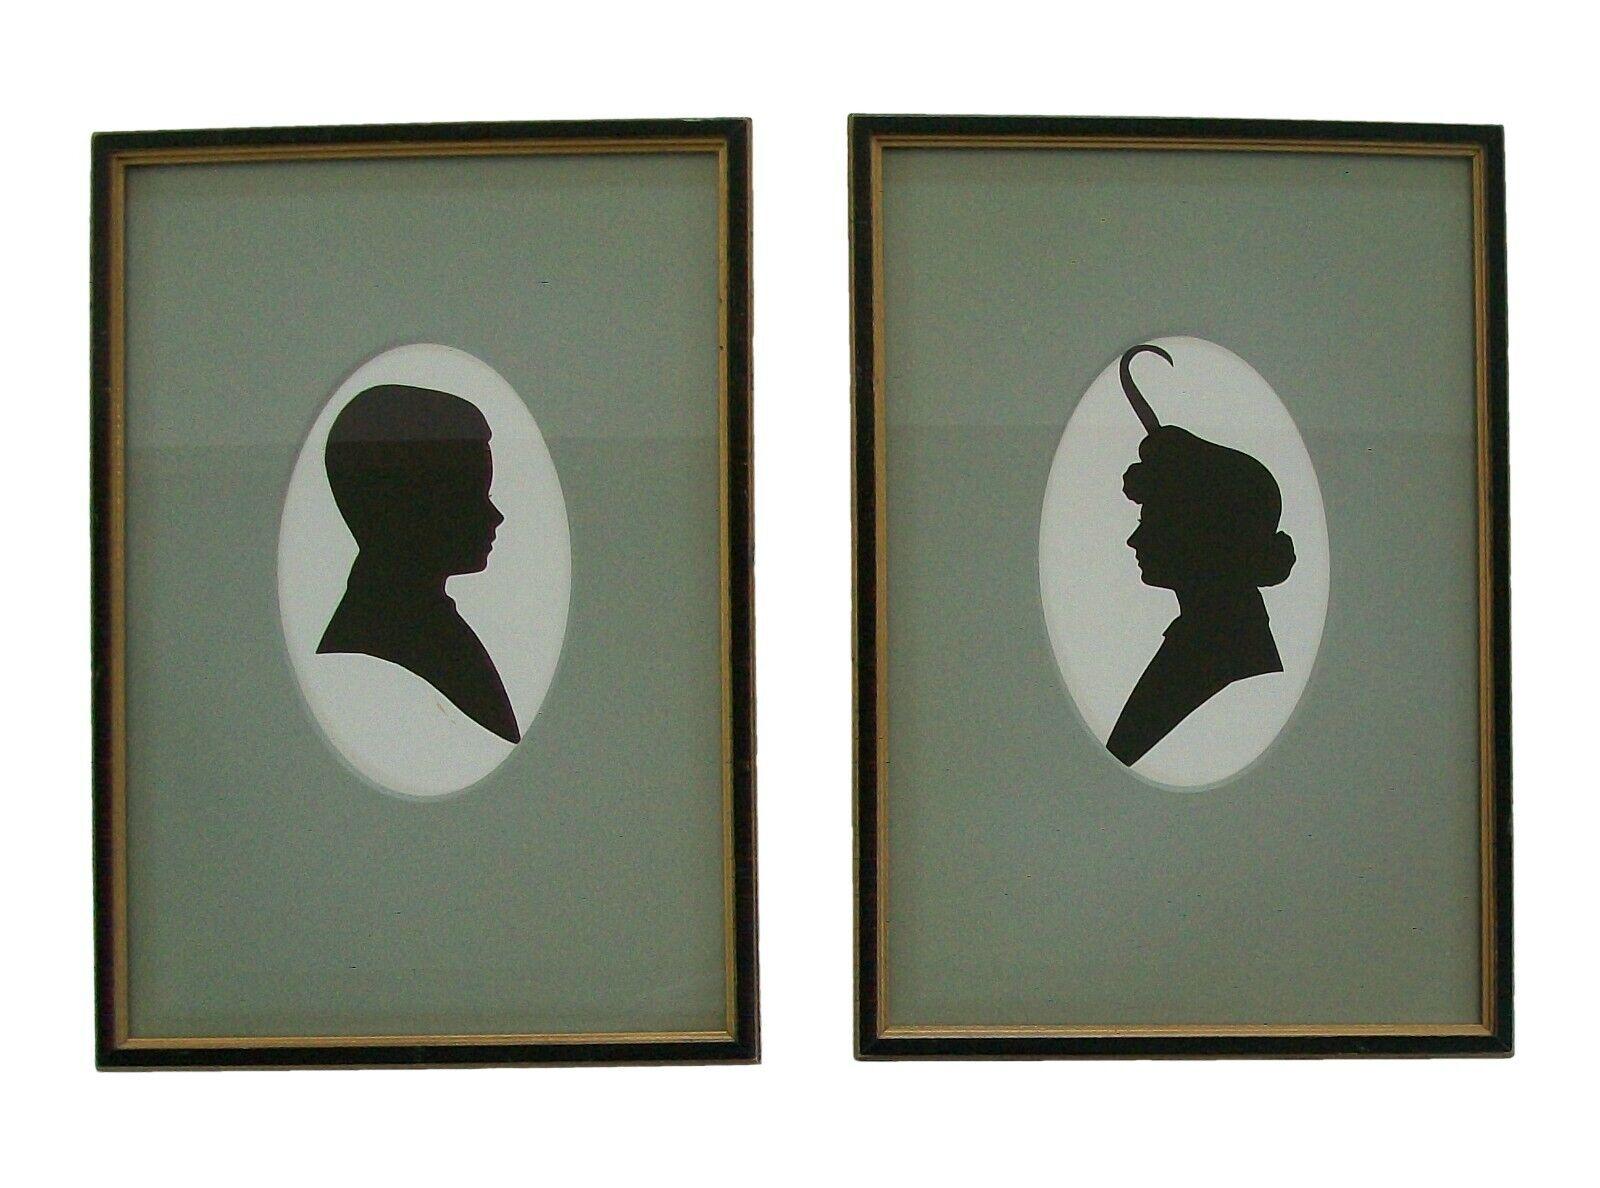 Vintage pair cut paper cameo silhouette portraits - the hand cut portraits glued down to a cream color background - featuring facing profiles of a young man and woman - fine quality vintage gold gilt and black lacquer frames with inset painted